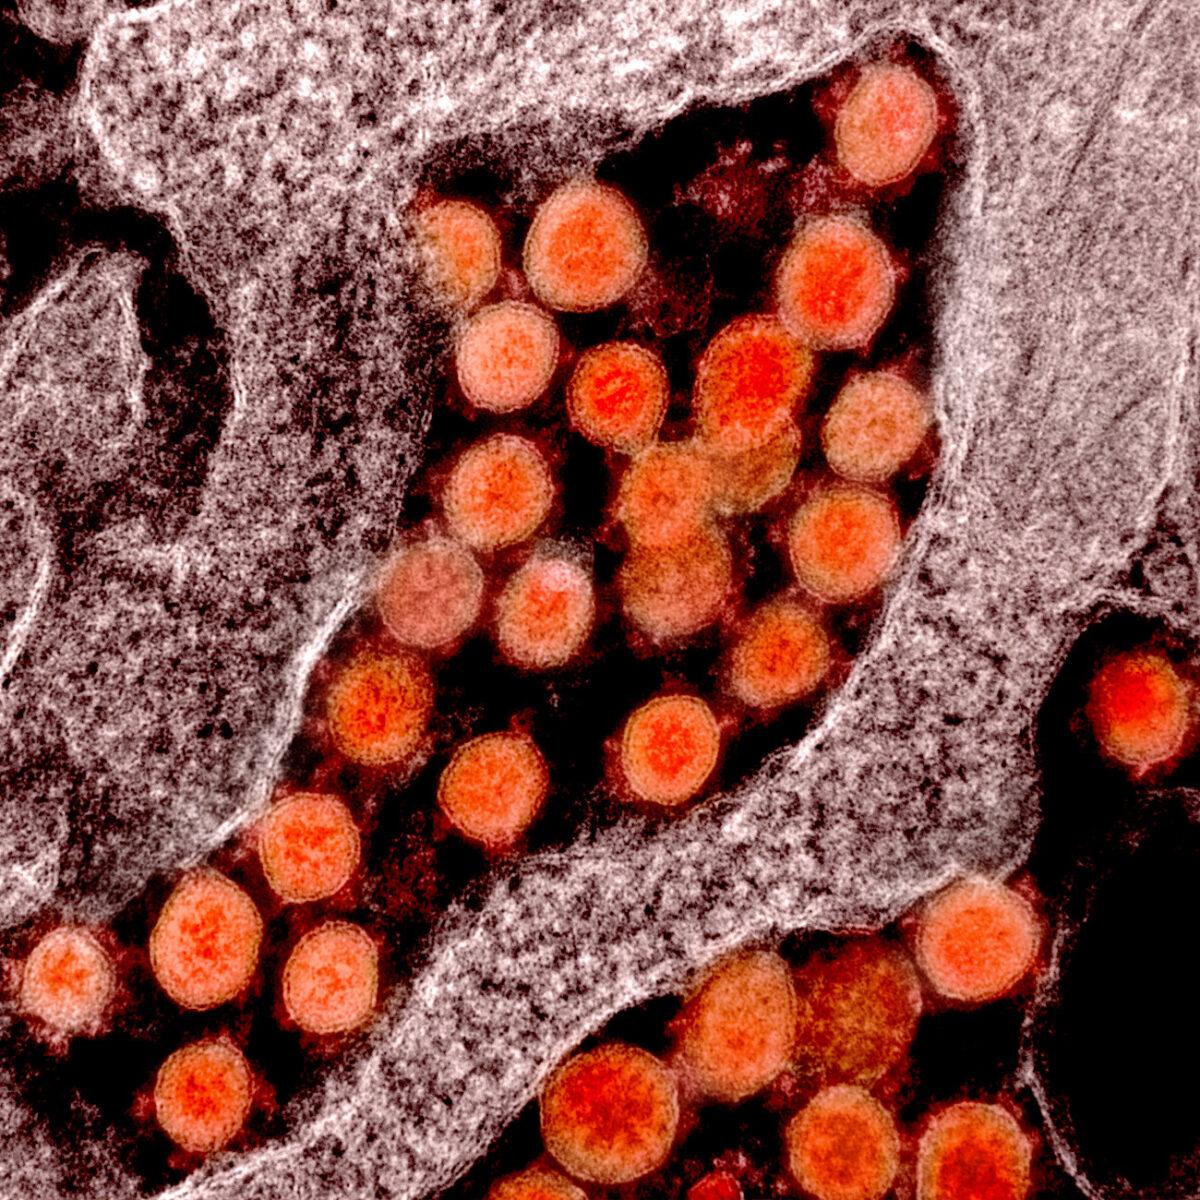 Transmission electron micrograph of particles of the CCP Virus, or SARS-CoV-2 virus, isolated from a patient. (NIAID)